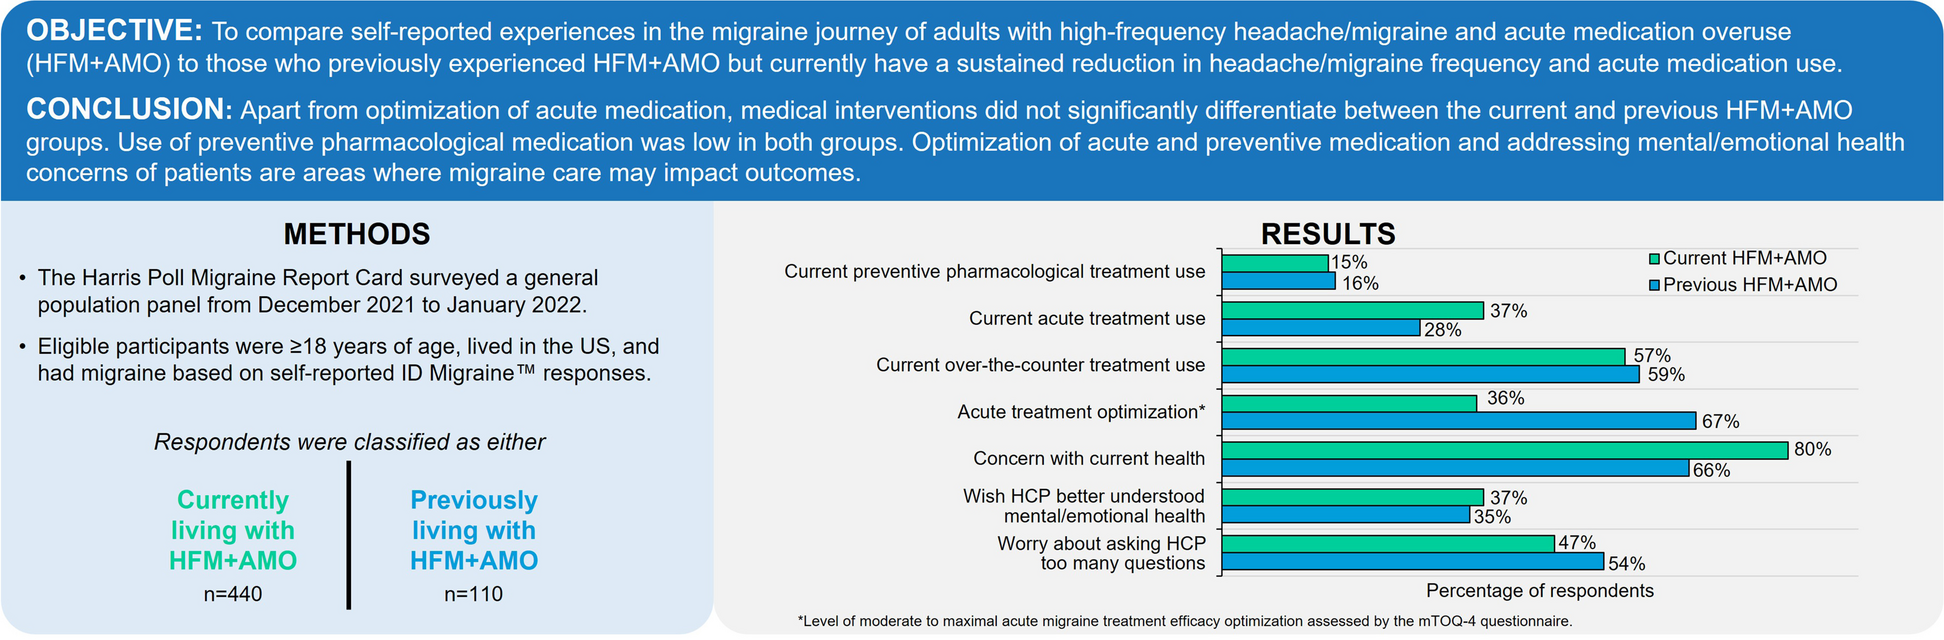 Harris Poll Migraine Report Card: population-based examination of high-frequency headache/migraine and acute medication overuse